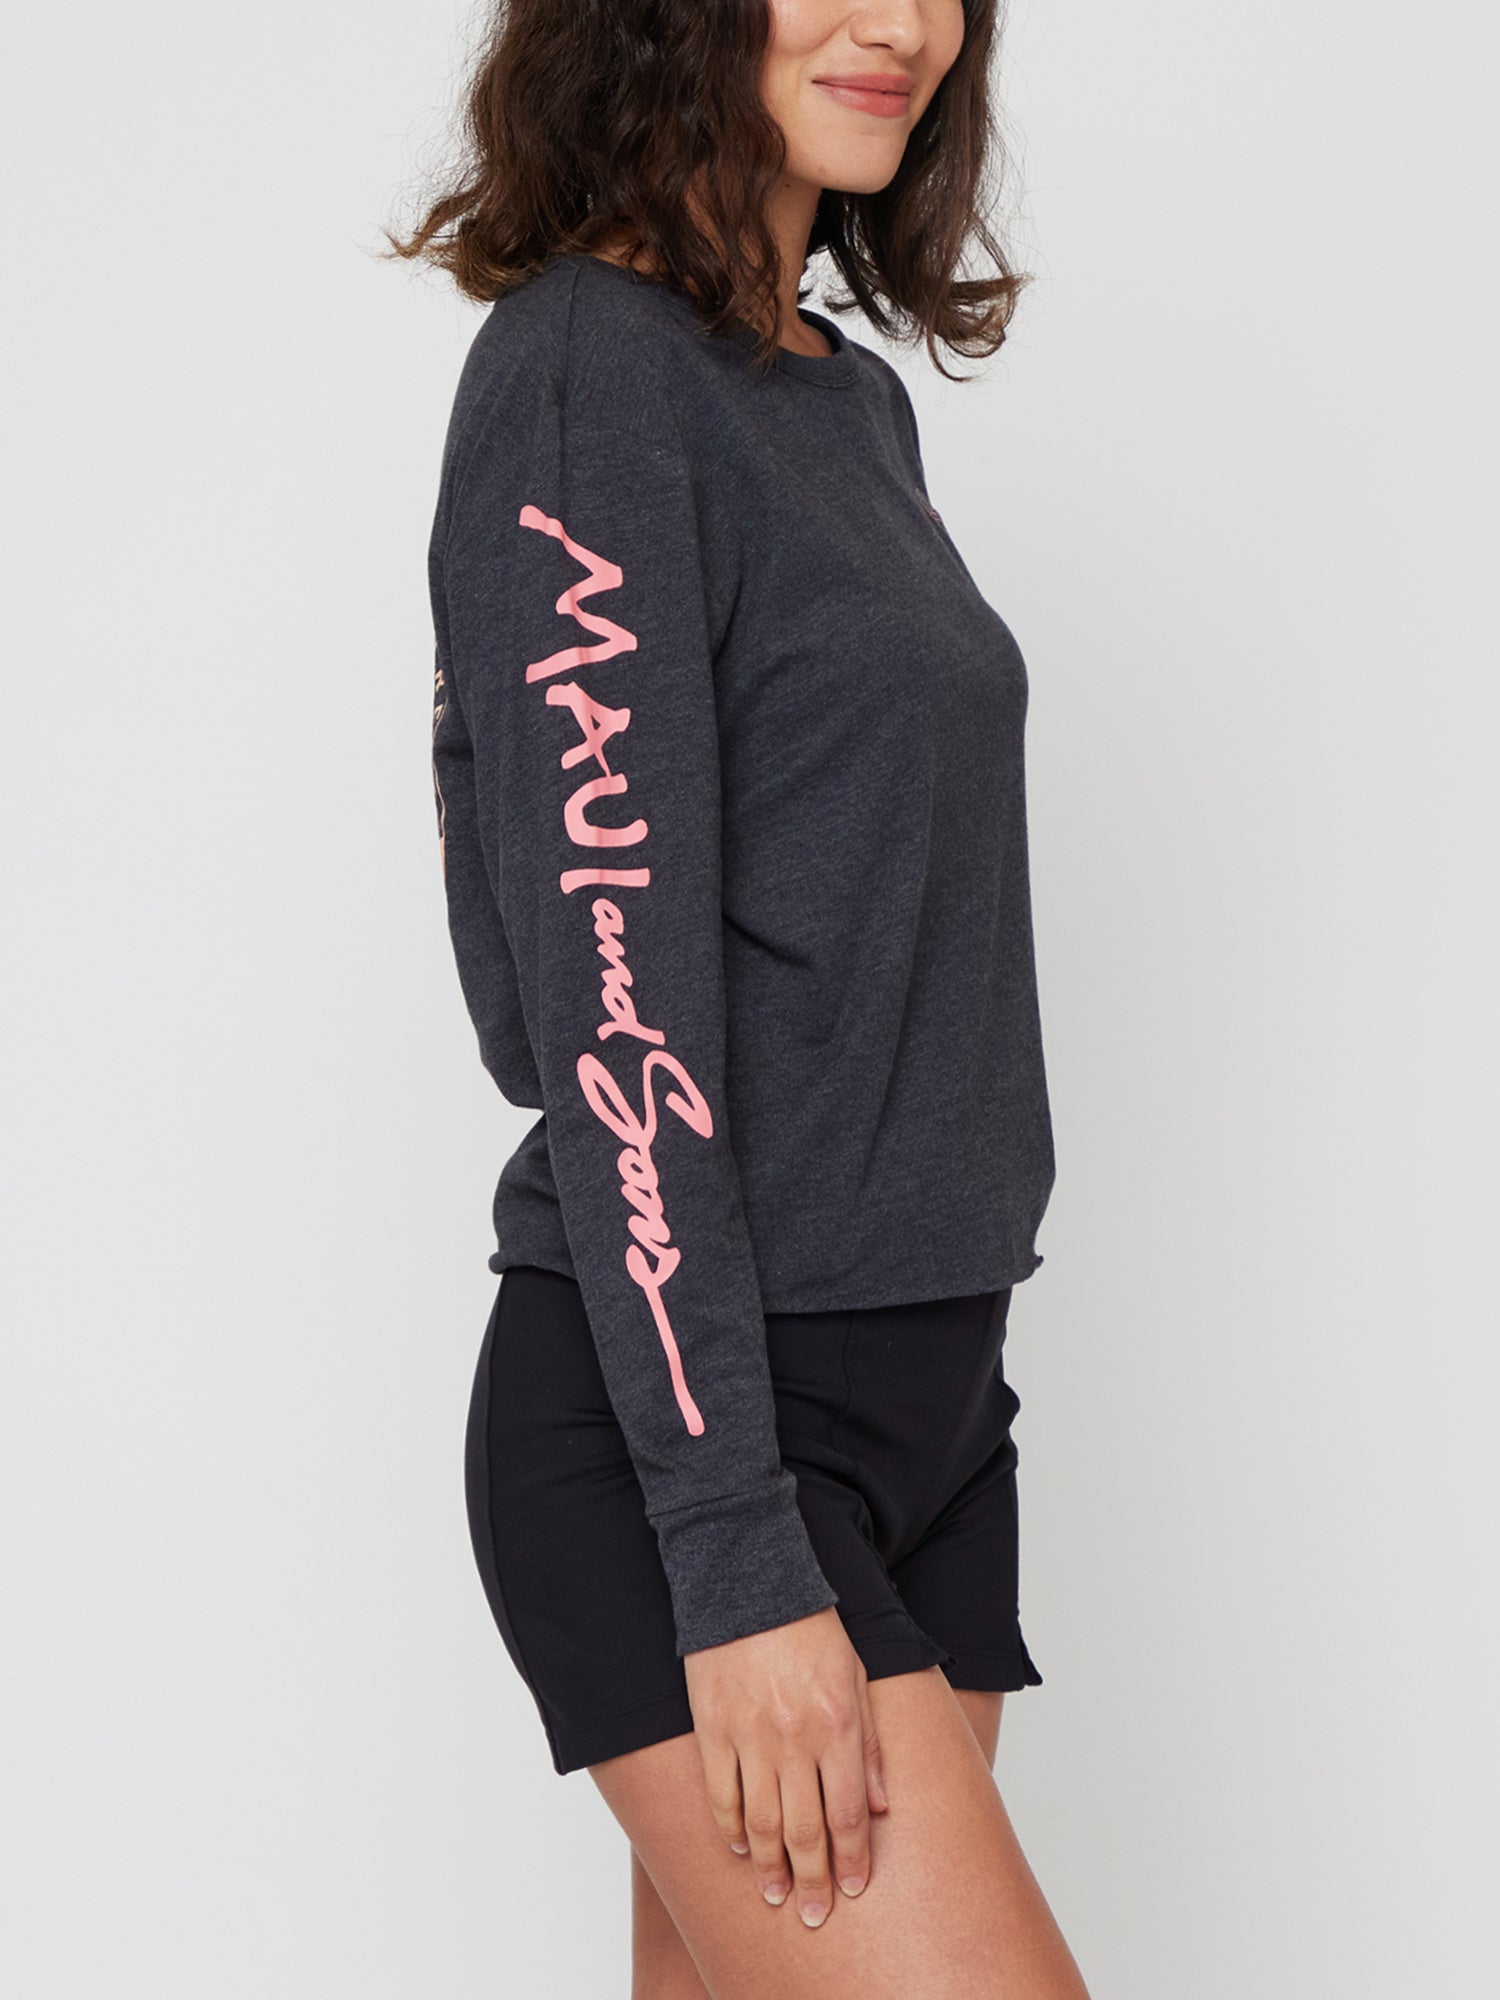 Set You Free Womens Long Sleeve in Black